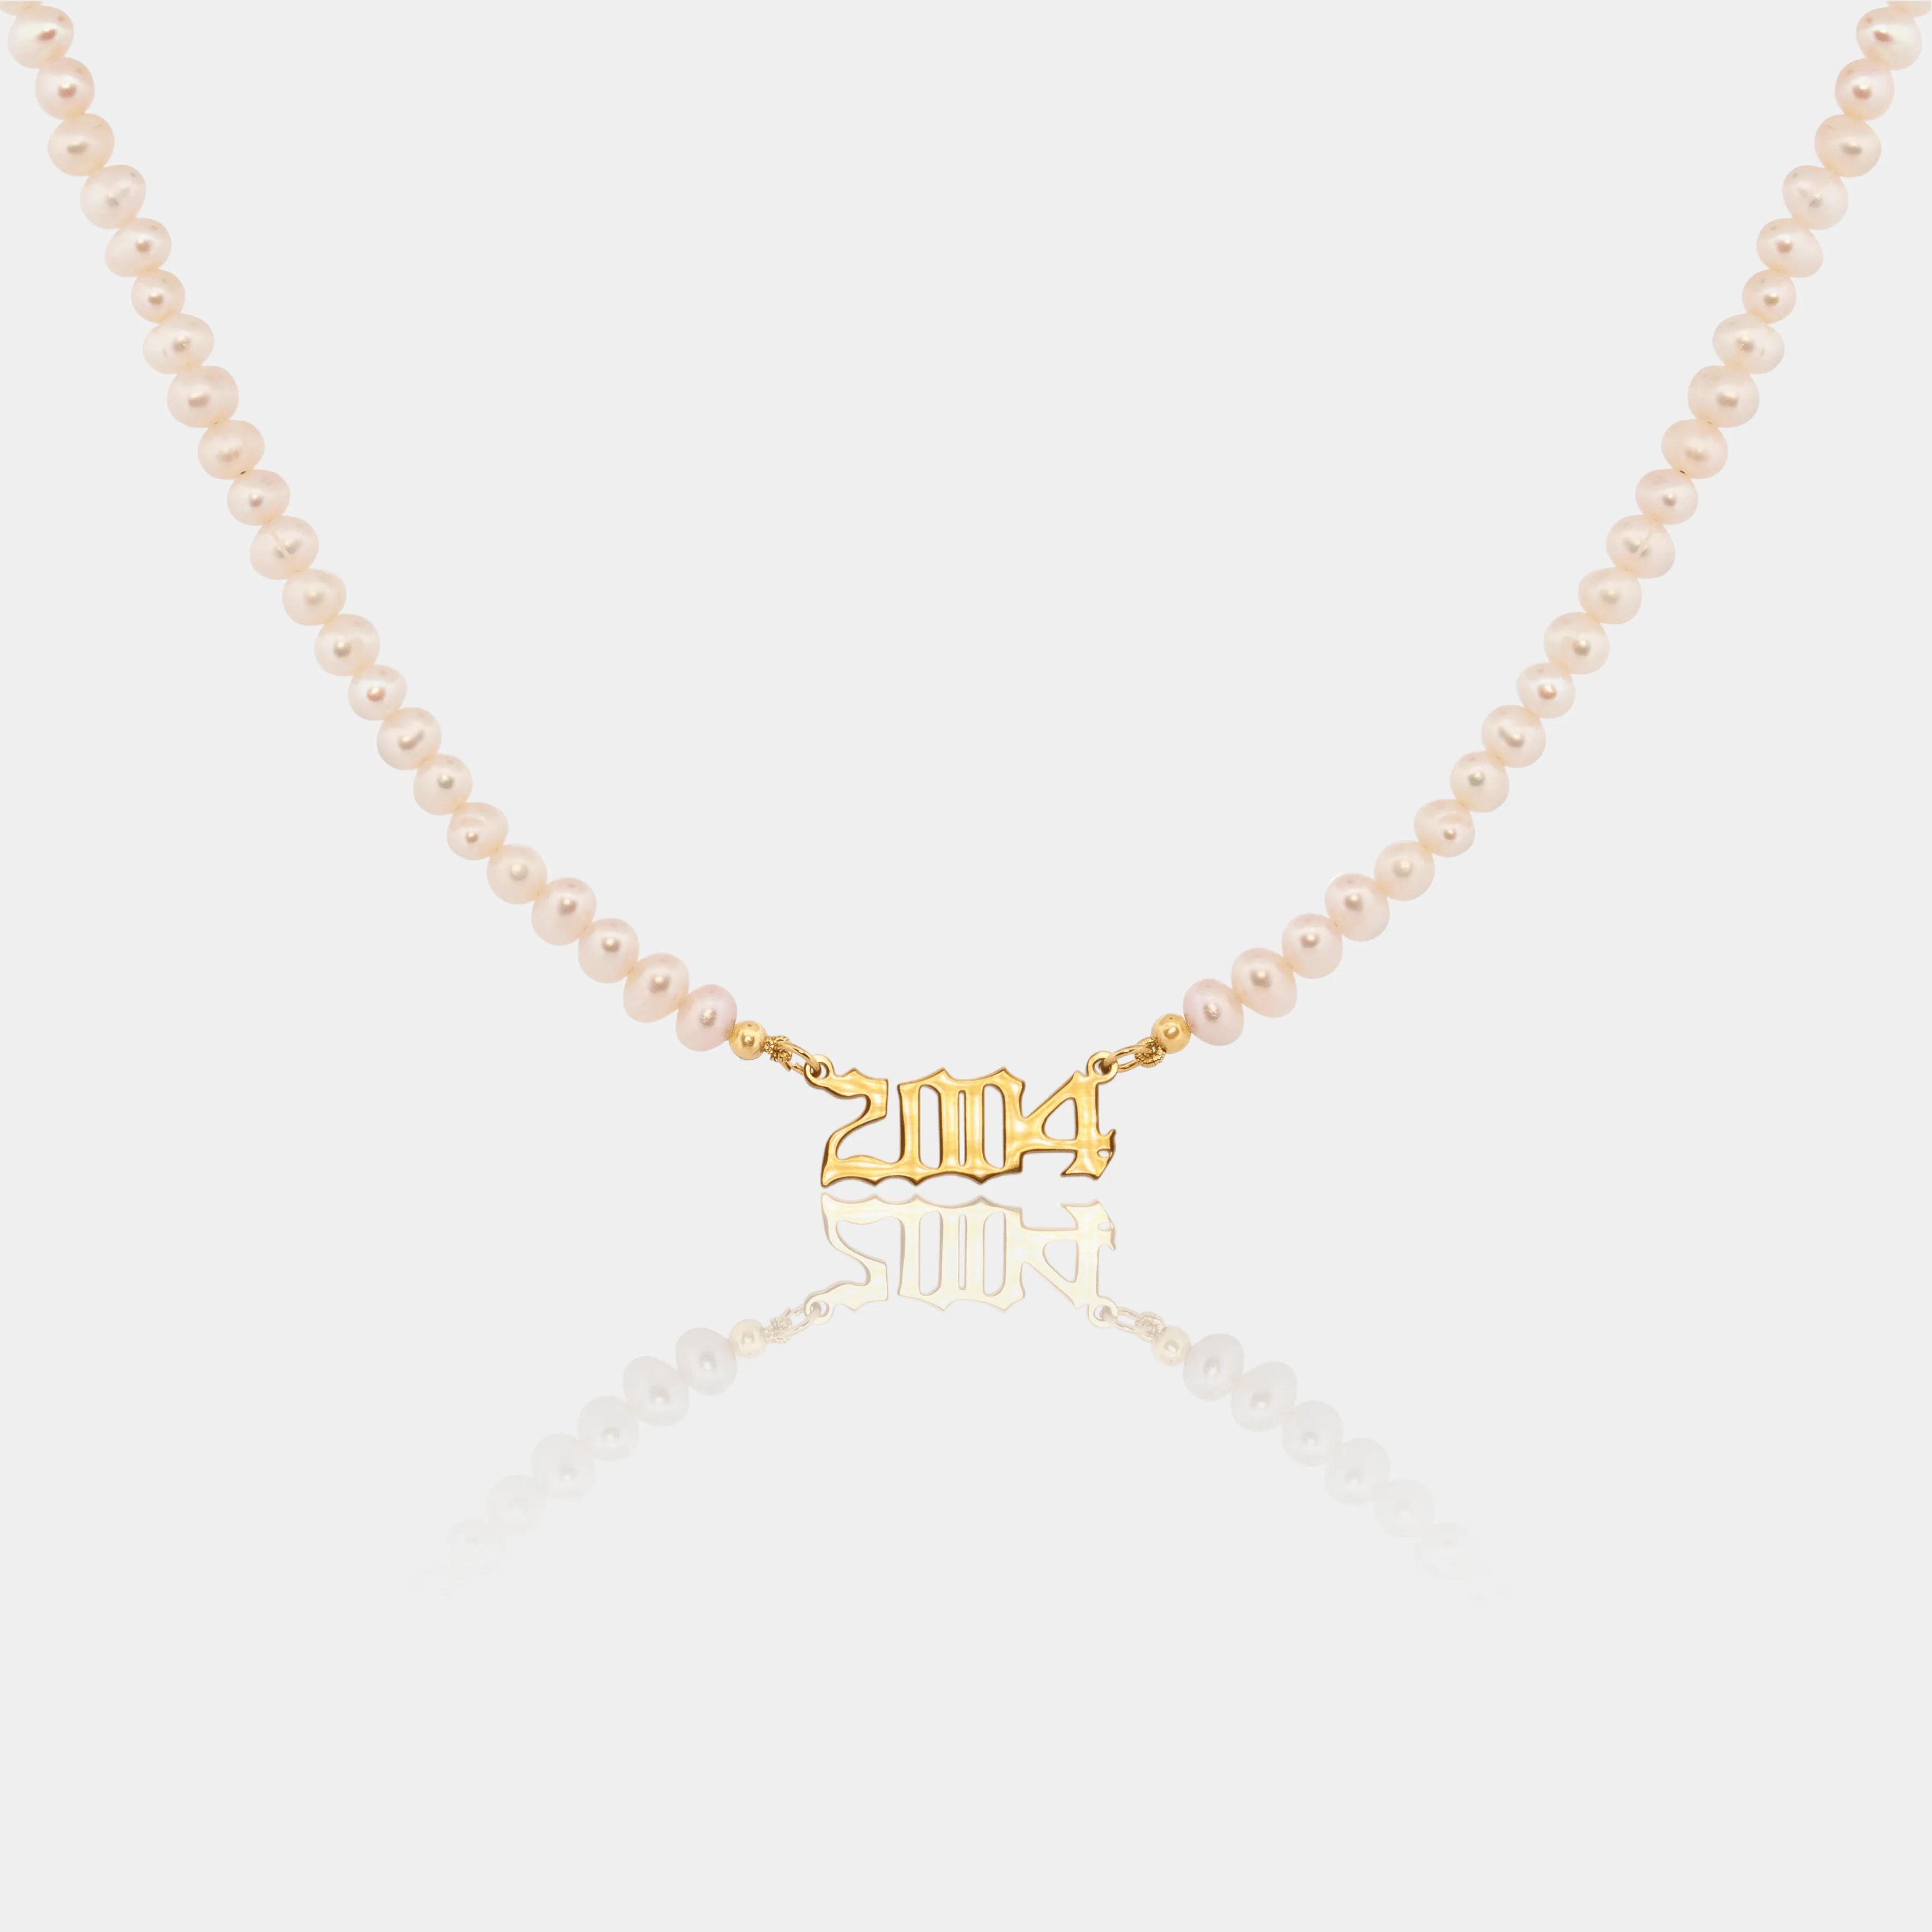 Birth Year Necklace | LINK'D THE LABEL